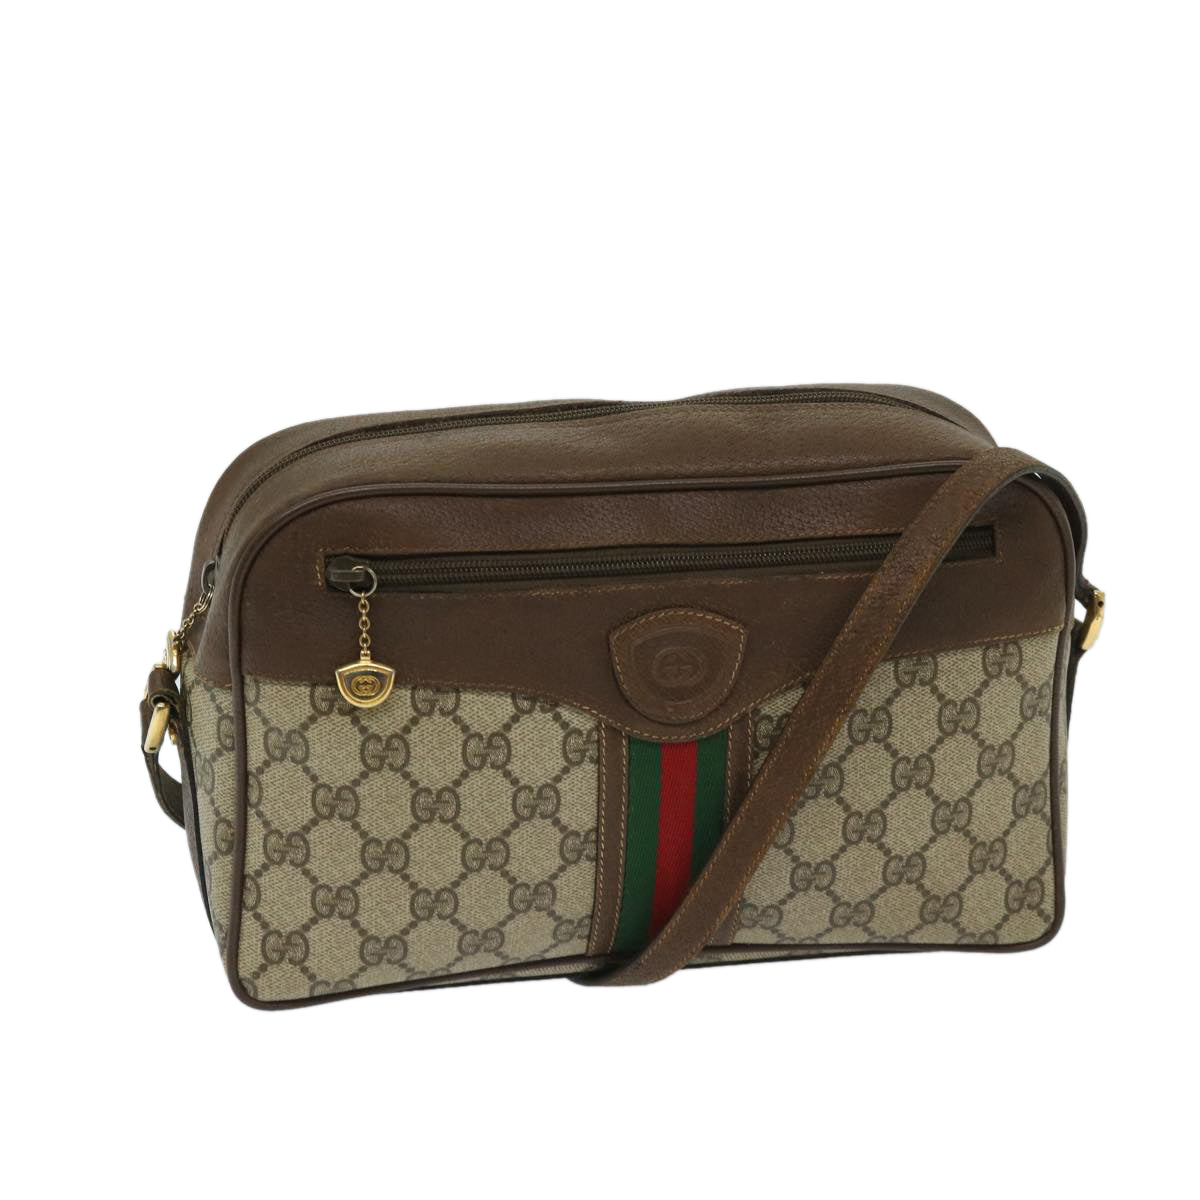 GUCCI GG Supreme Web Sherry Line Shoulder Bag PVC Beige Red Green Auth bs12628